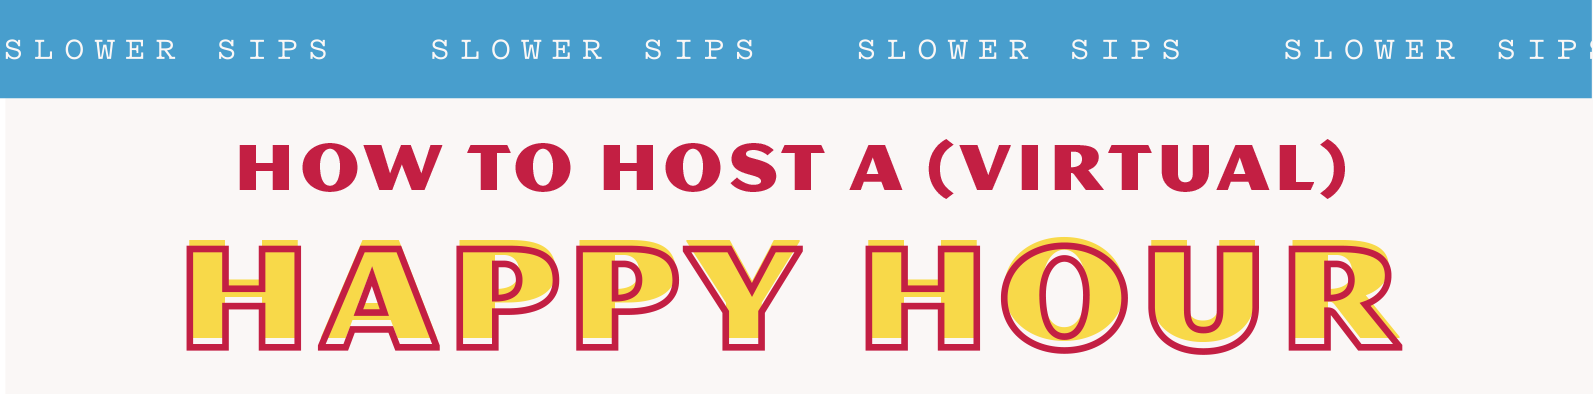 How to Host a (virtual) Happy Hour